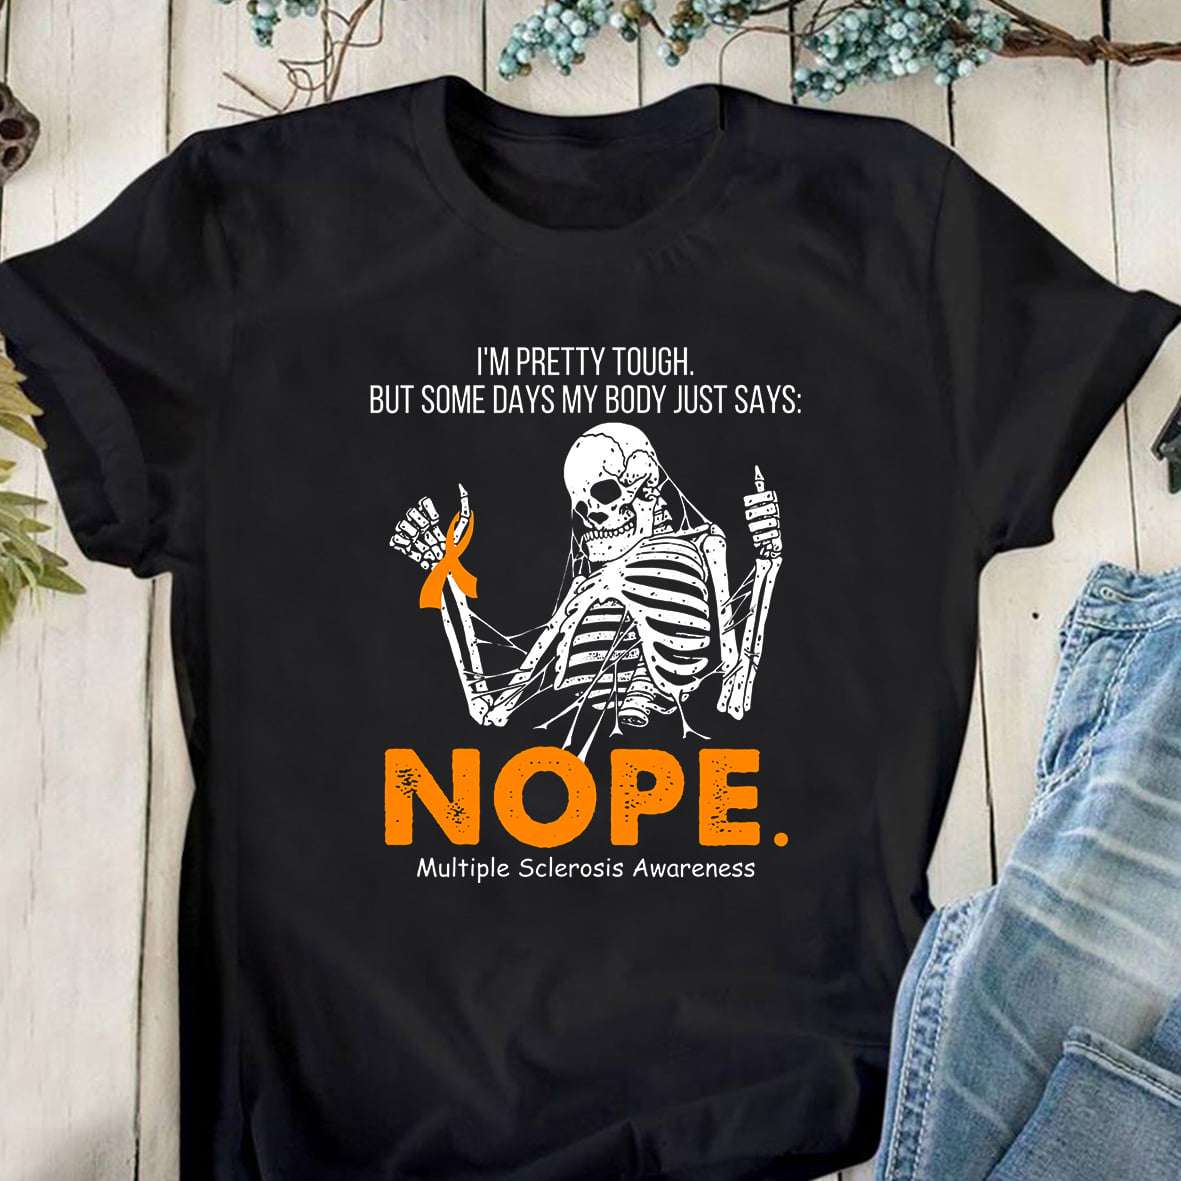 Multiple Sclerosis Skeleton - I'm pretty tough but some days my body just says nope multiple sclerosis awareness